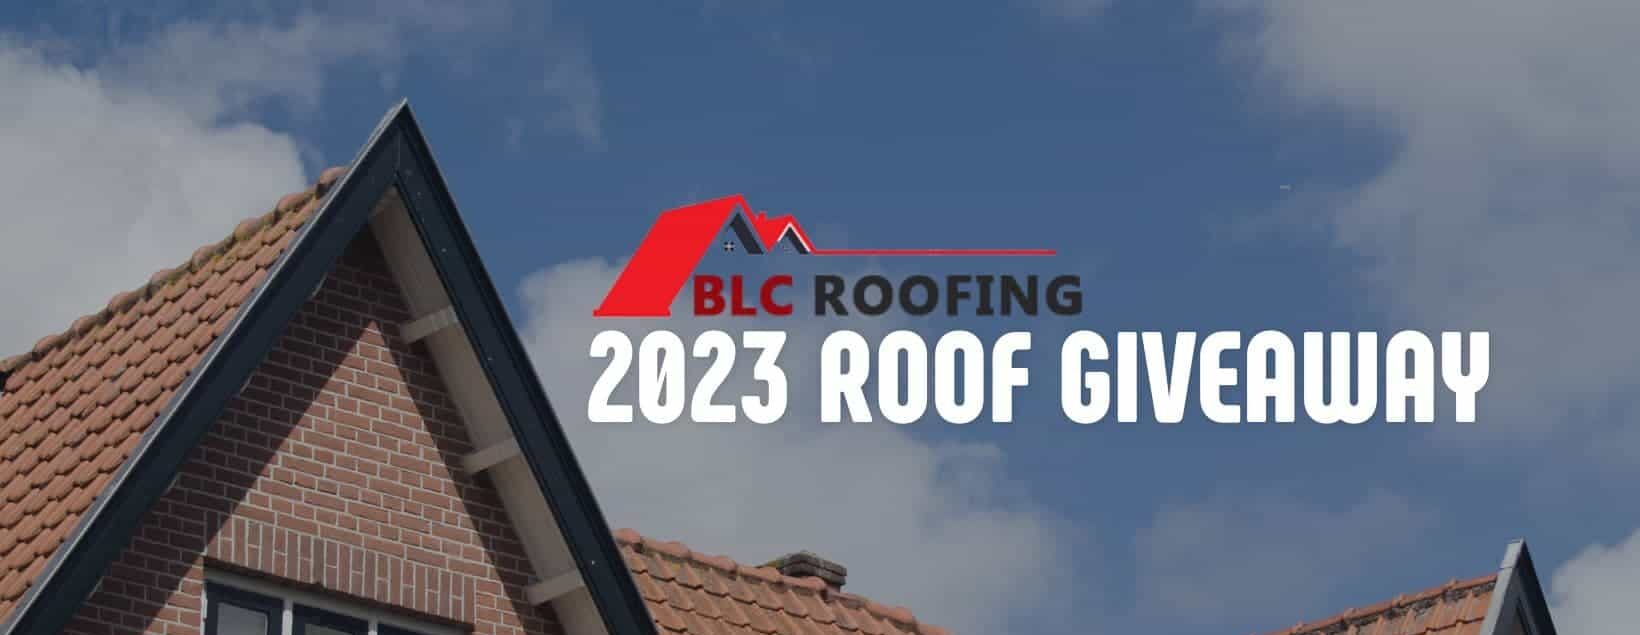 BLC Roofing 2023 Roof Giveaway